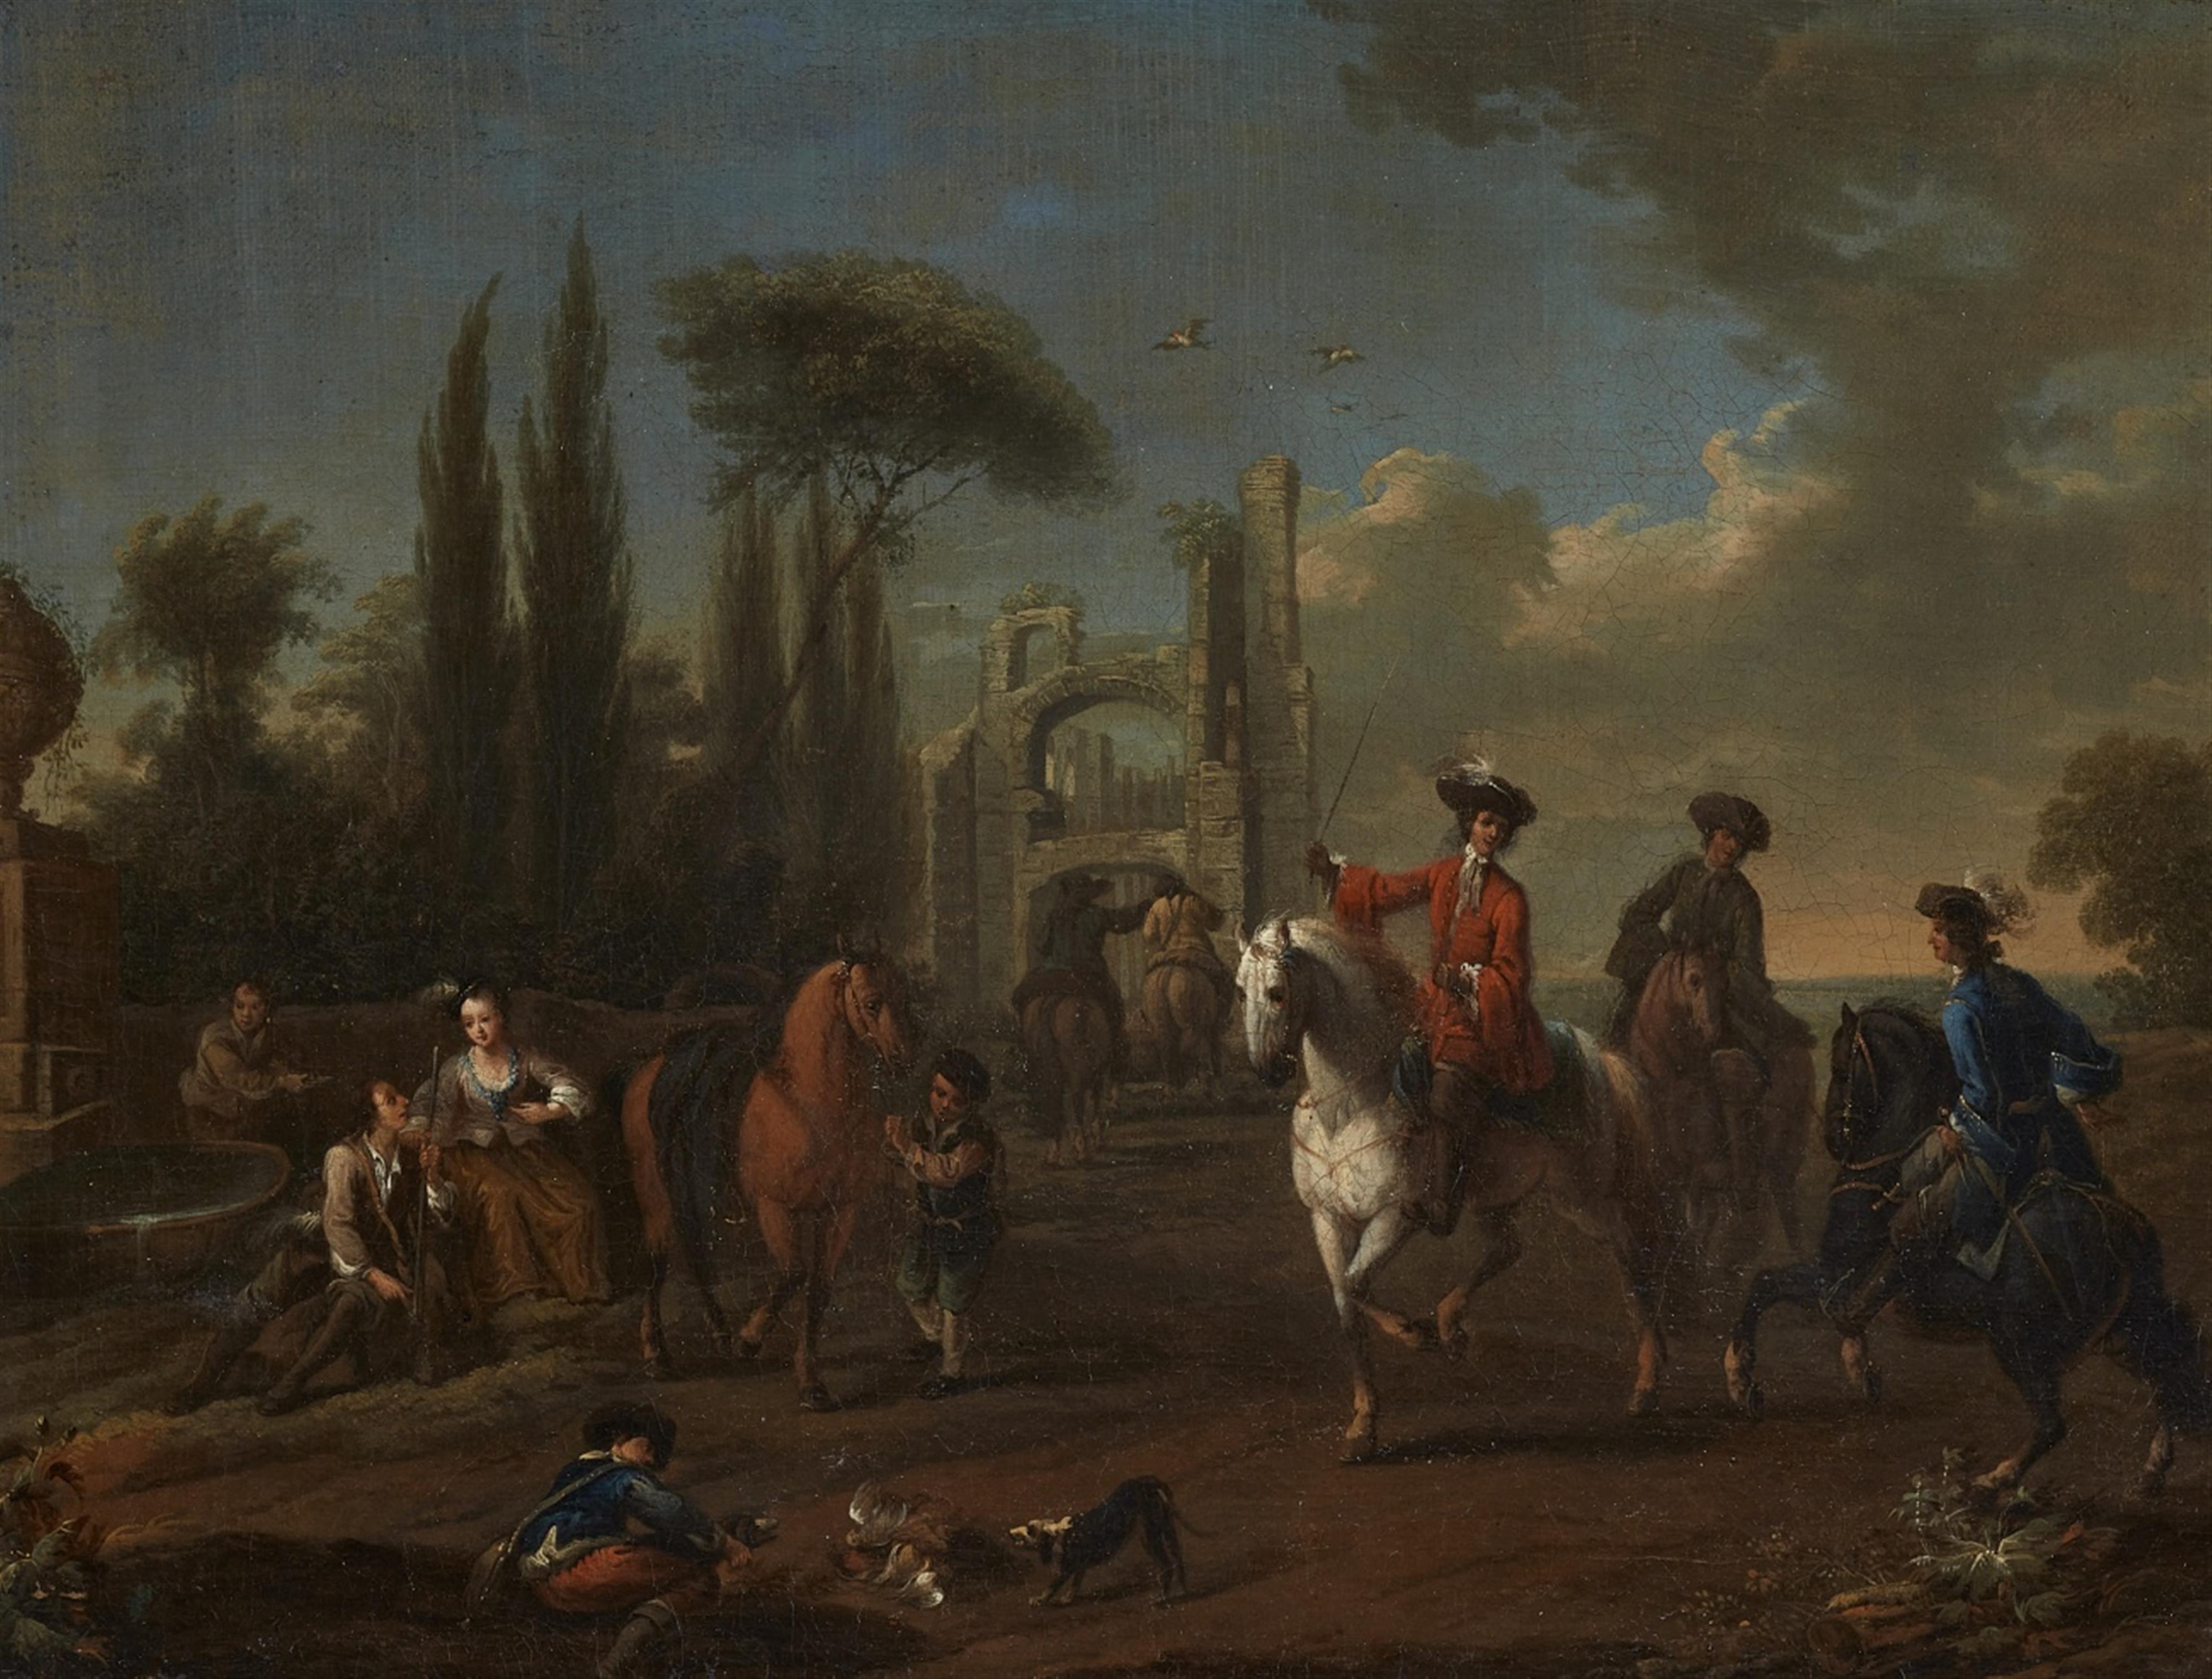 Franz de Paula Ferg - Hunting Party Departing in a Southern Landscape - image-1